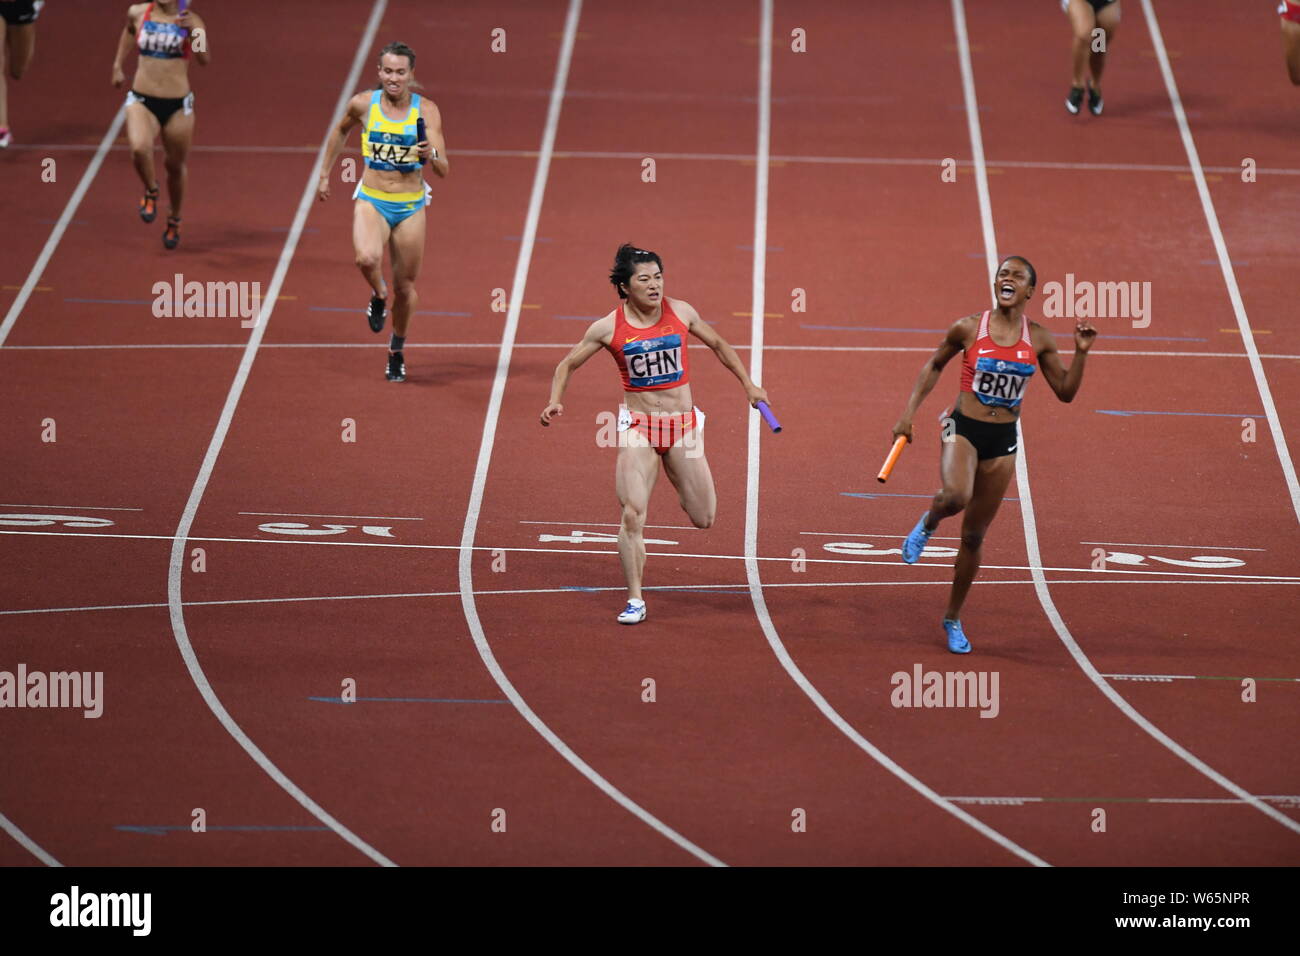 Salwa Naser of Bahrain, right, crosses the finish line to win in the women's 4x100m relay final of the athletics competition during the 2018 Asian Gam Stock Photo